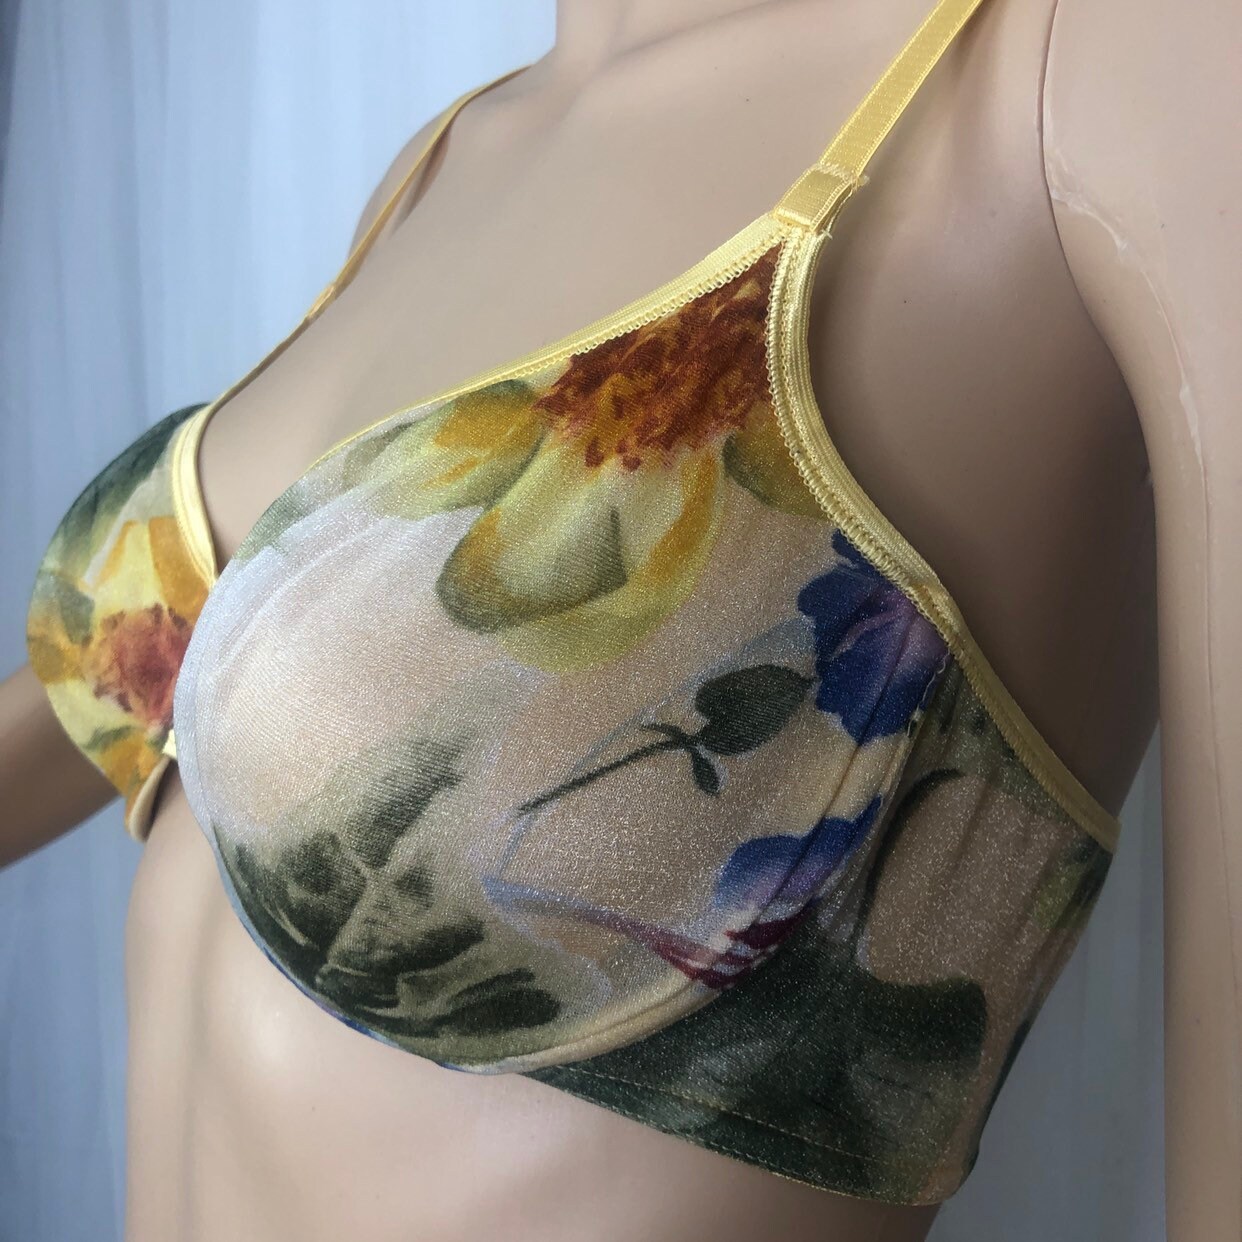 Warners 36C The NAKED Truth Sheer / Underwire Bra Style 02530 / Yellow  Shimmering Gold Floral Print Seamless Support Bra 34 D